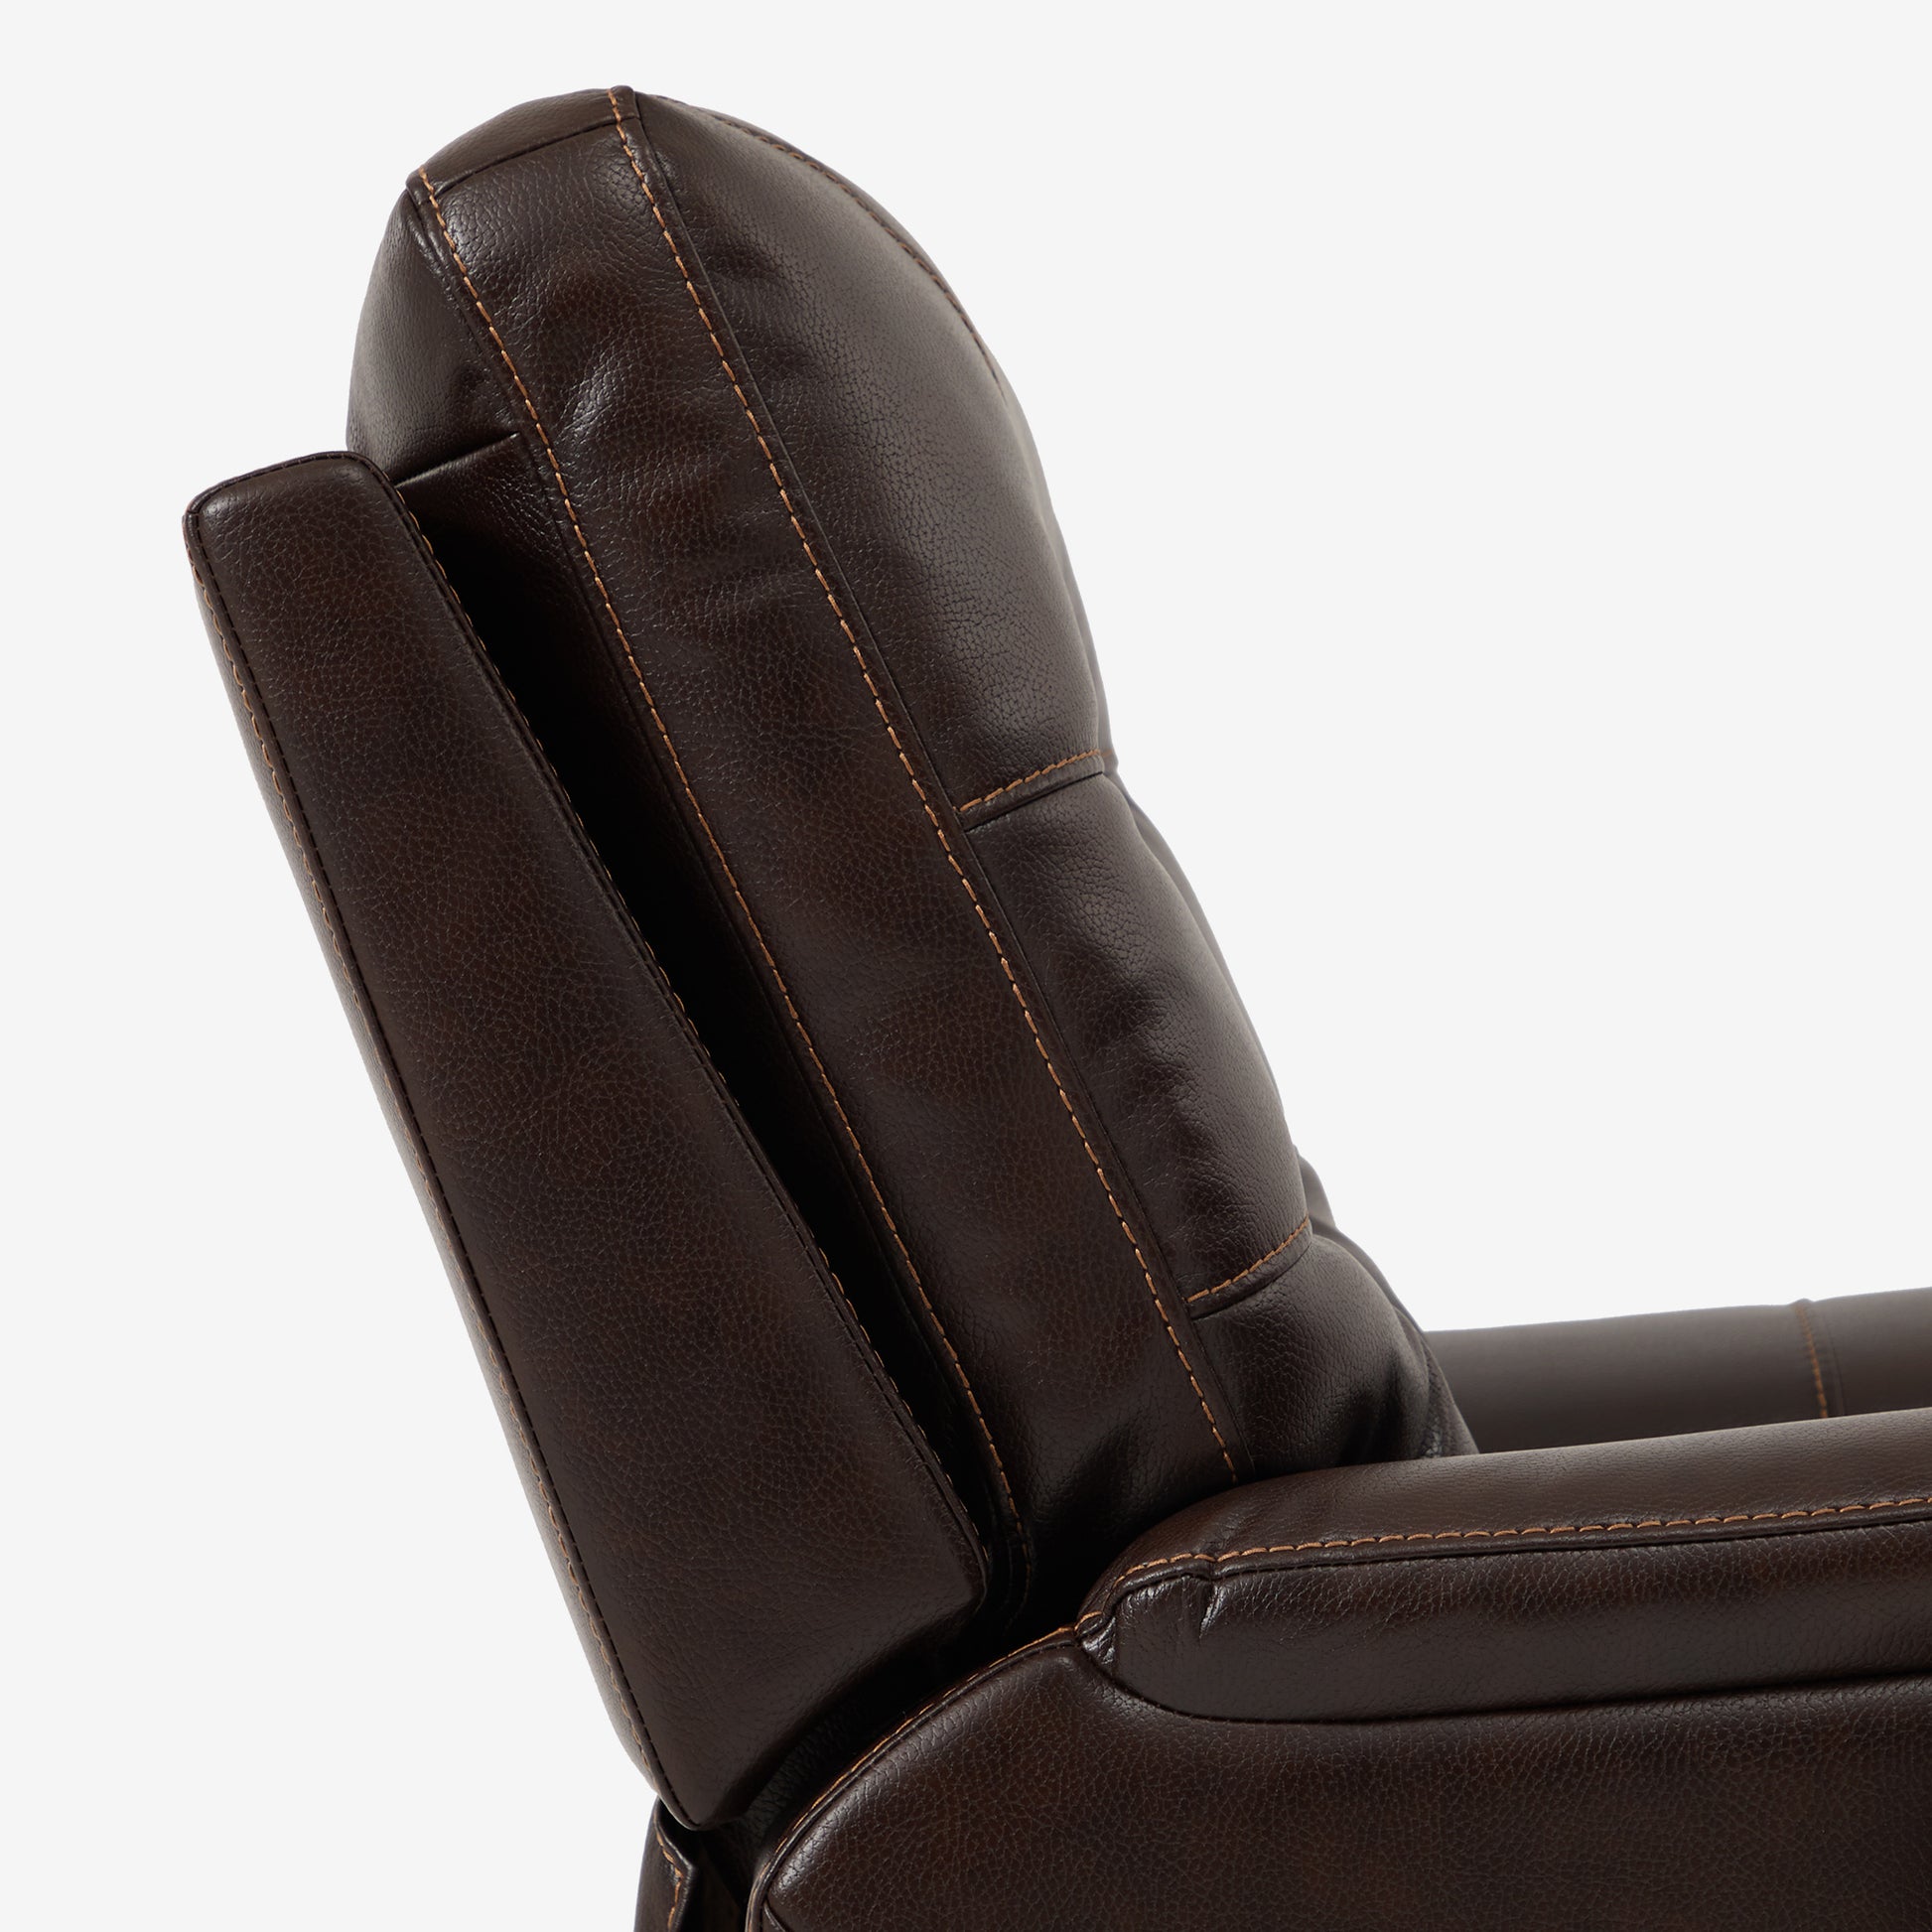 Heavy Duty Extra Wide Recliners -Designed For Tall Man